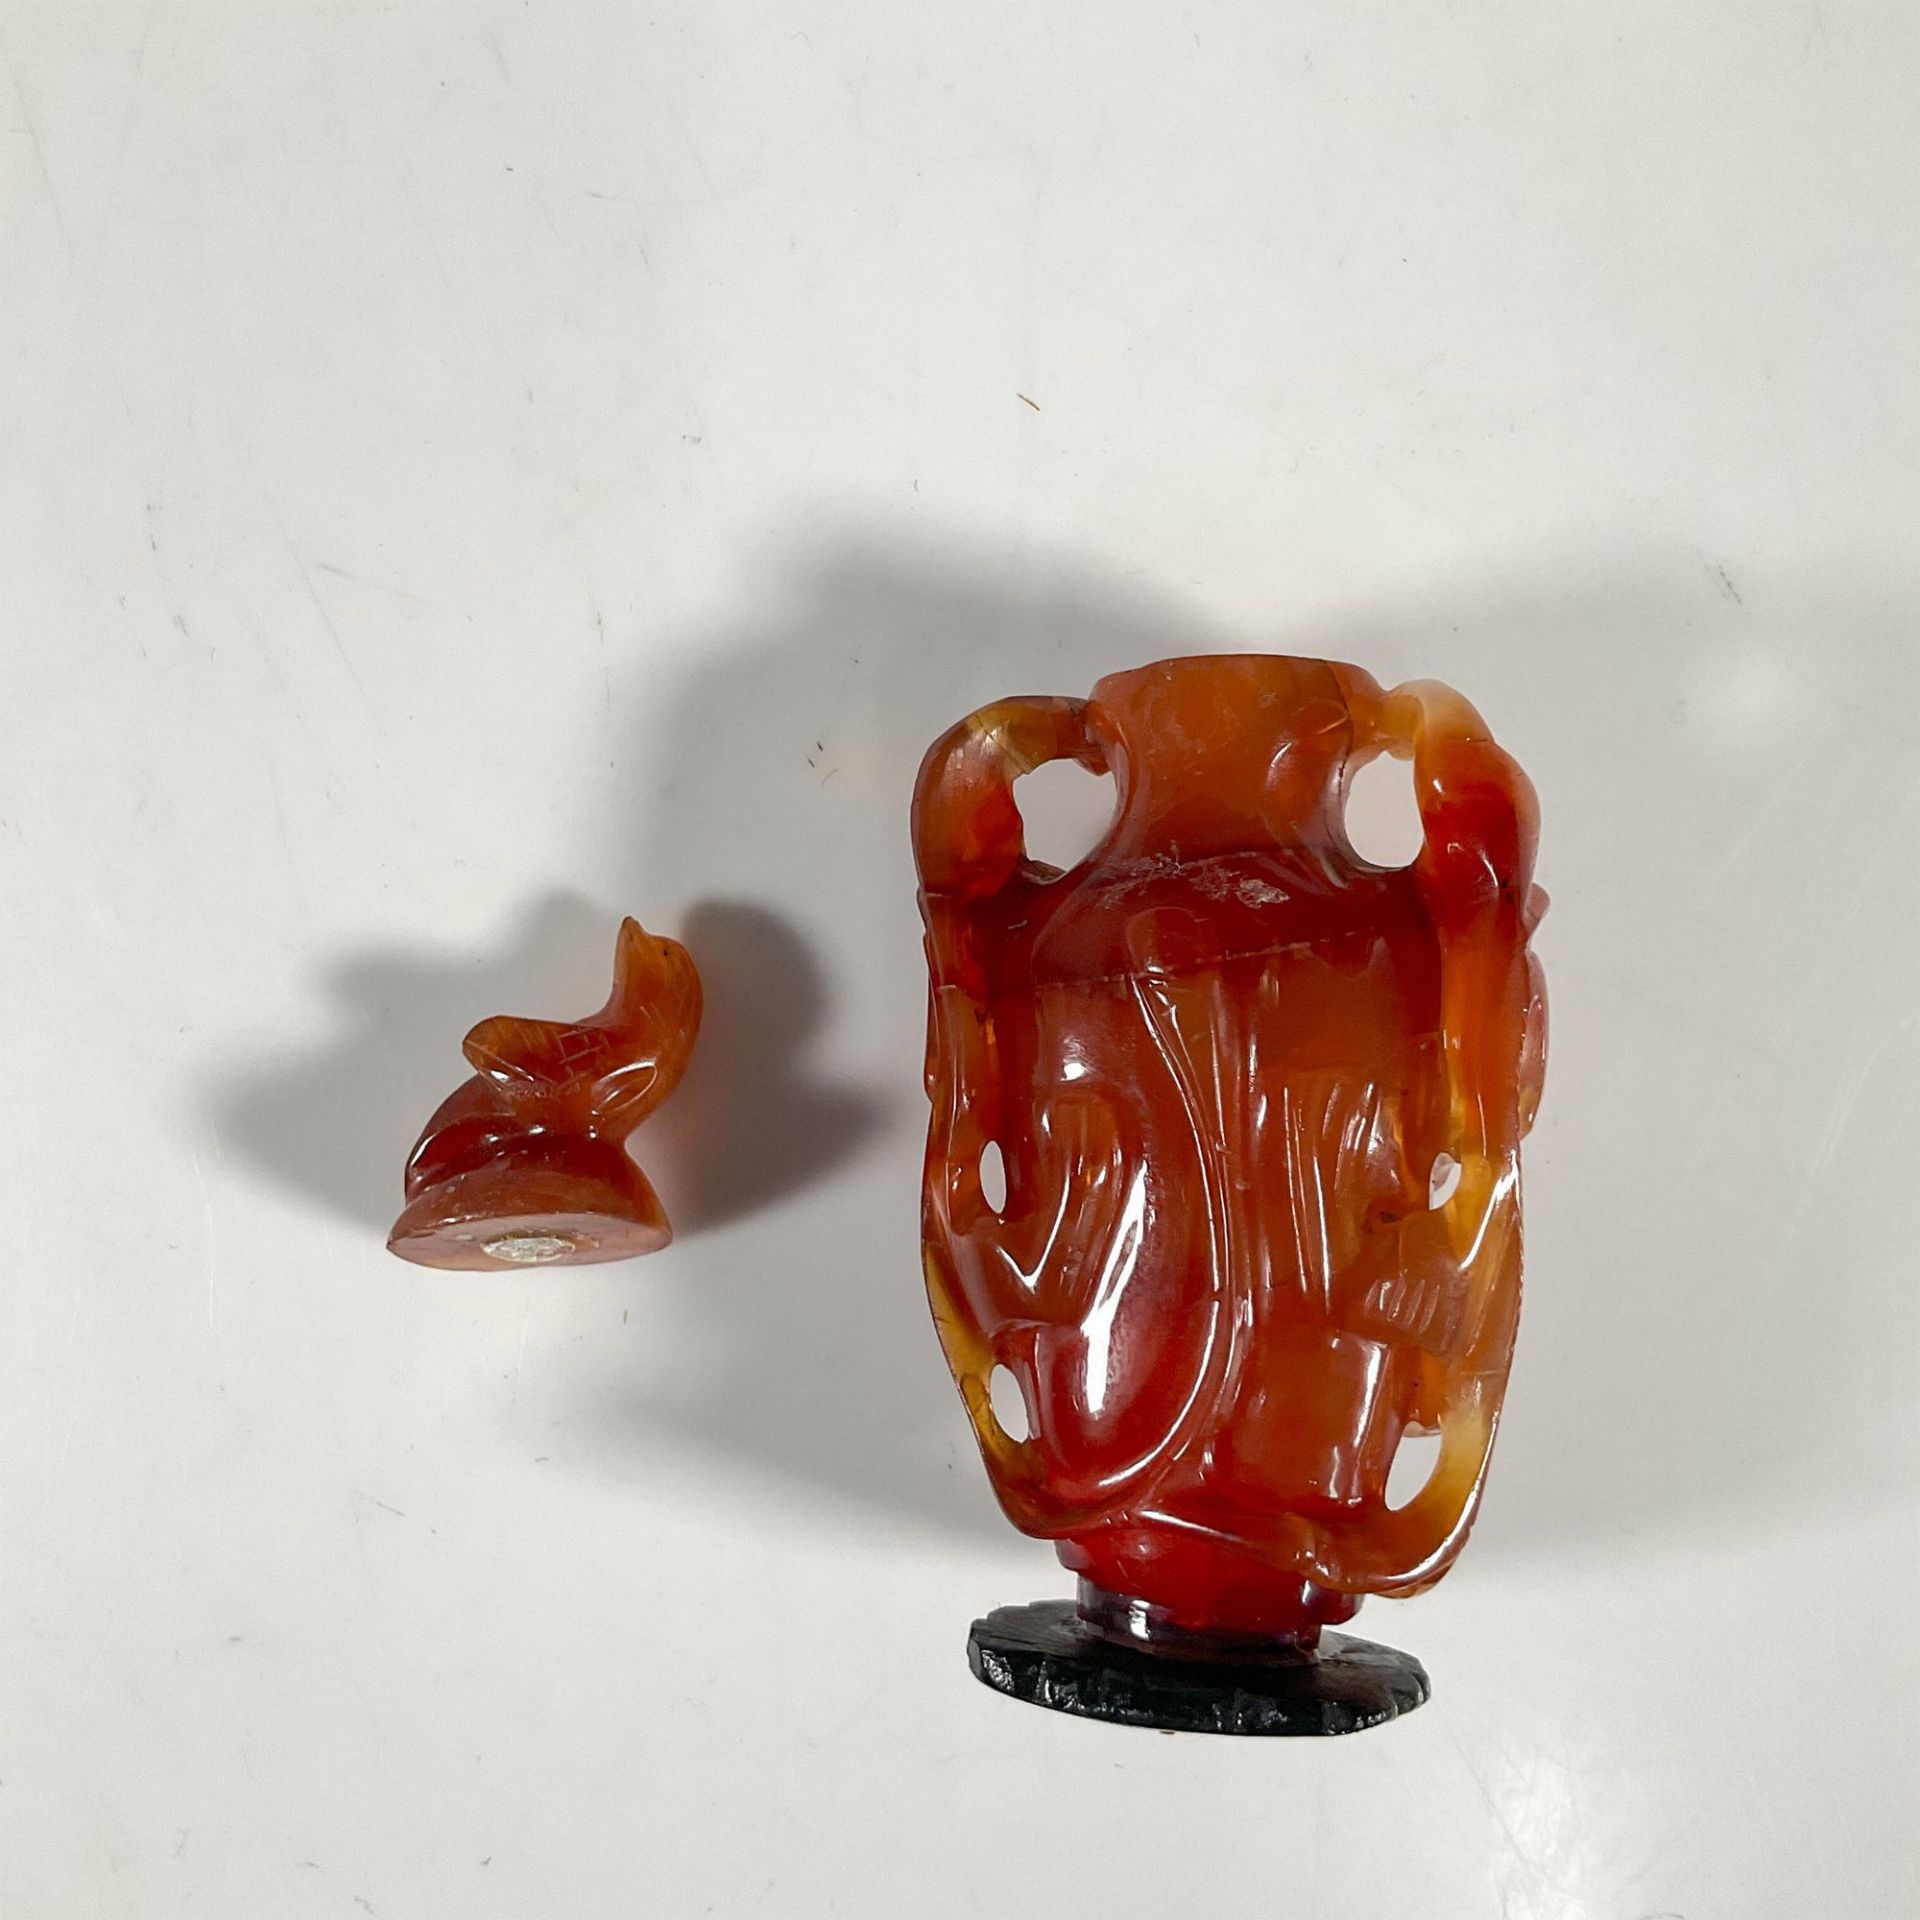 Chinese Carnelian and Agate Snuff Bottle - Image 2 of 2